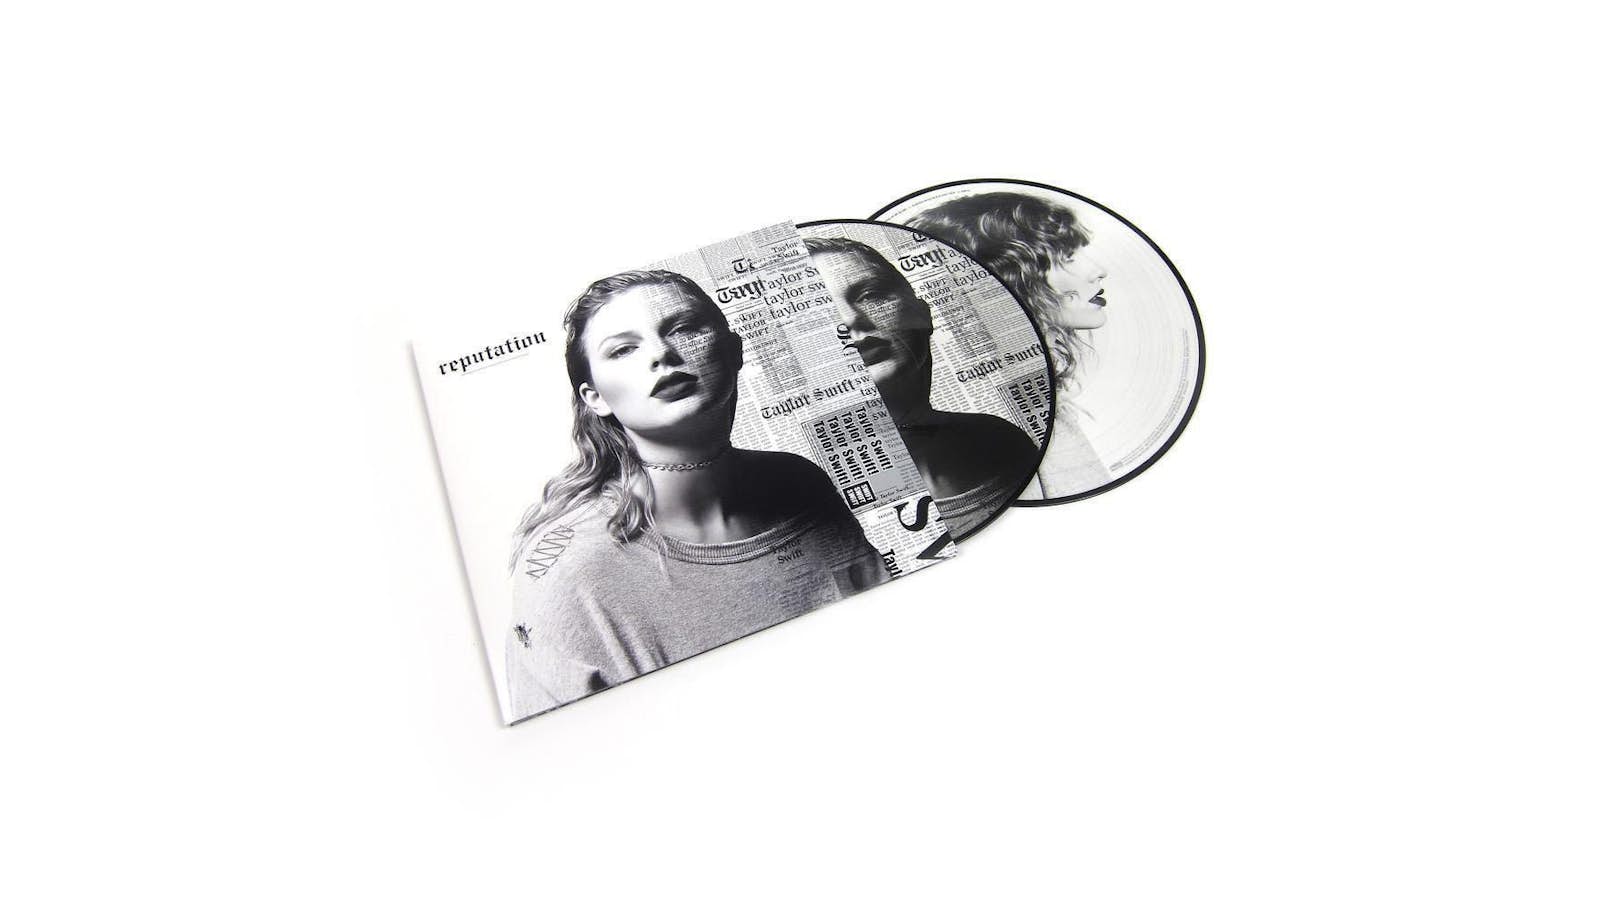 Taylor Swift reputation (Picture Disc) Vinyl Record